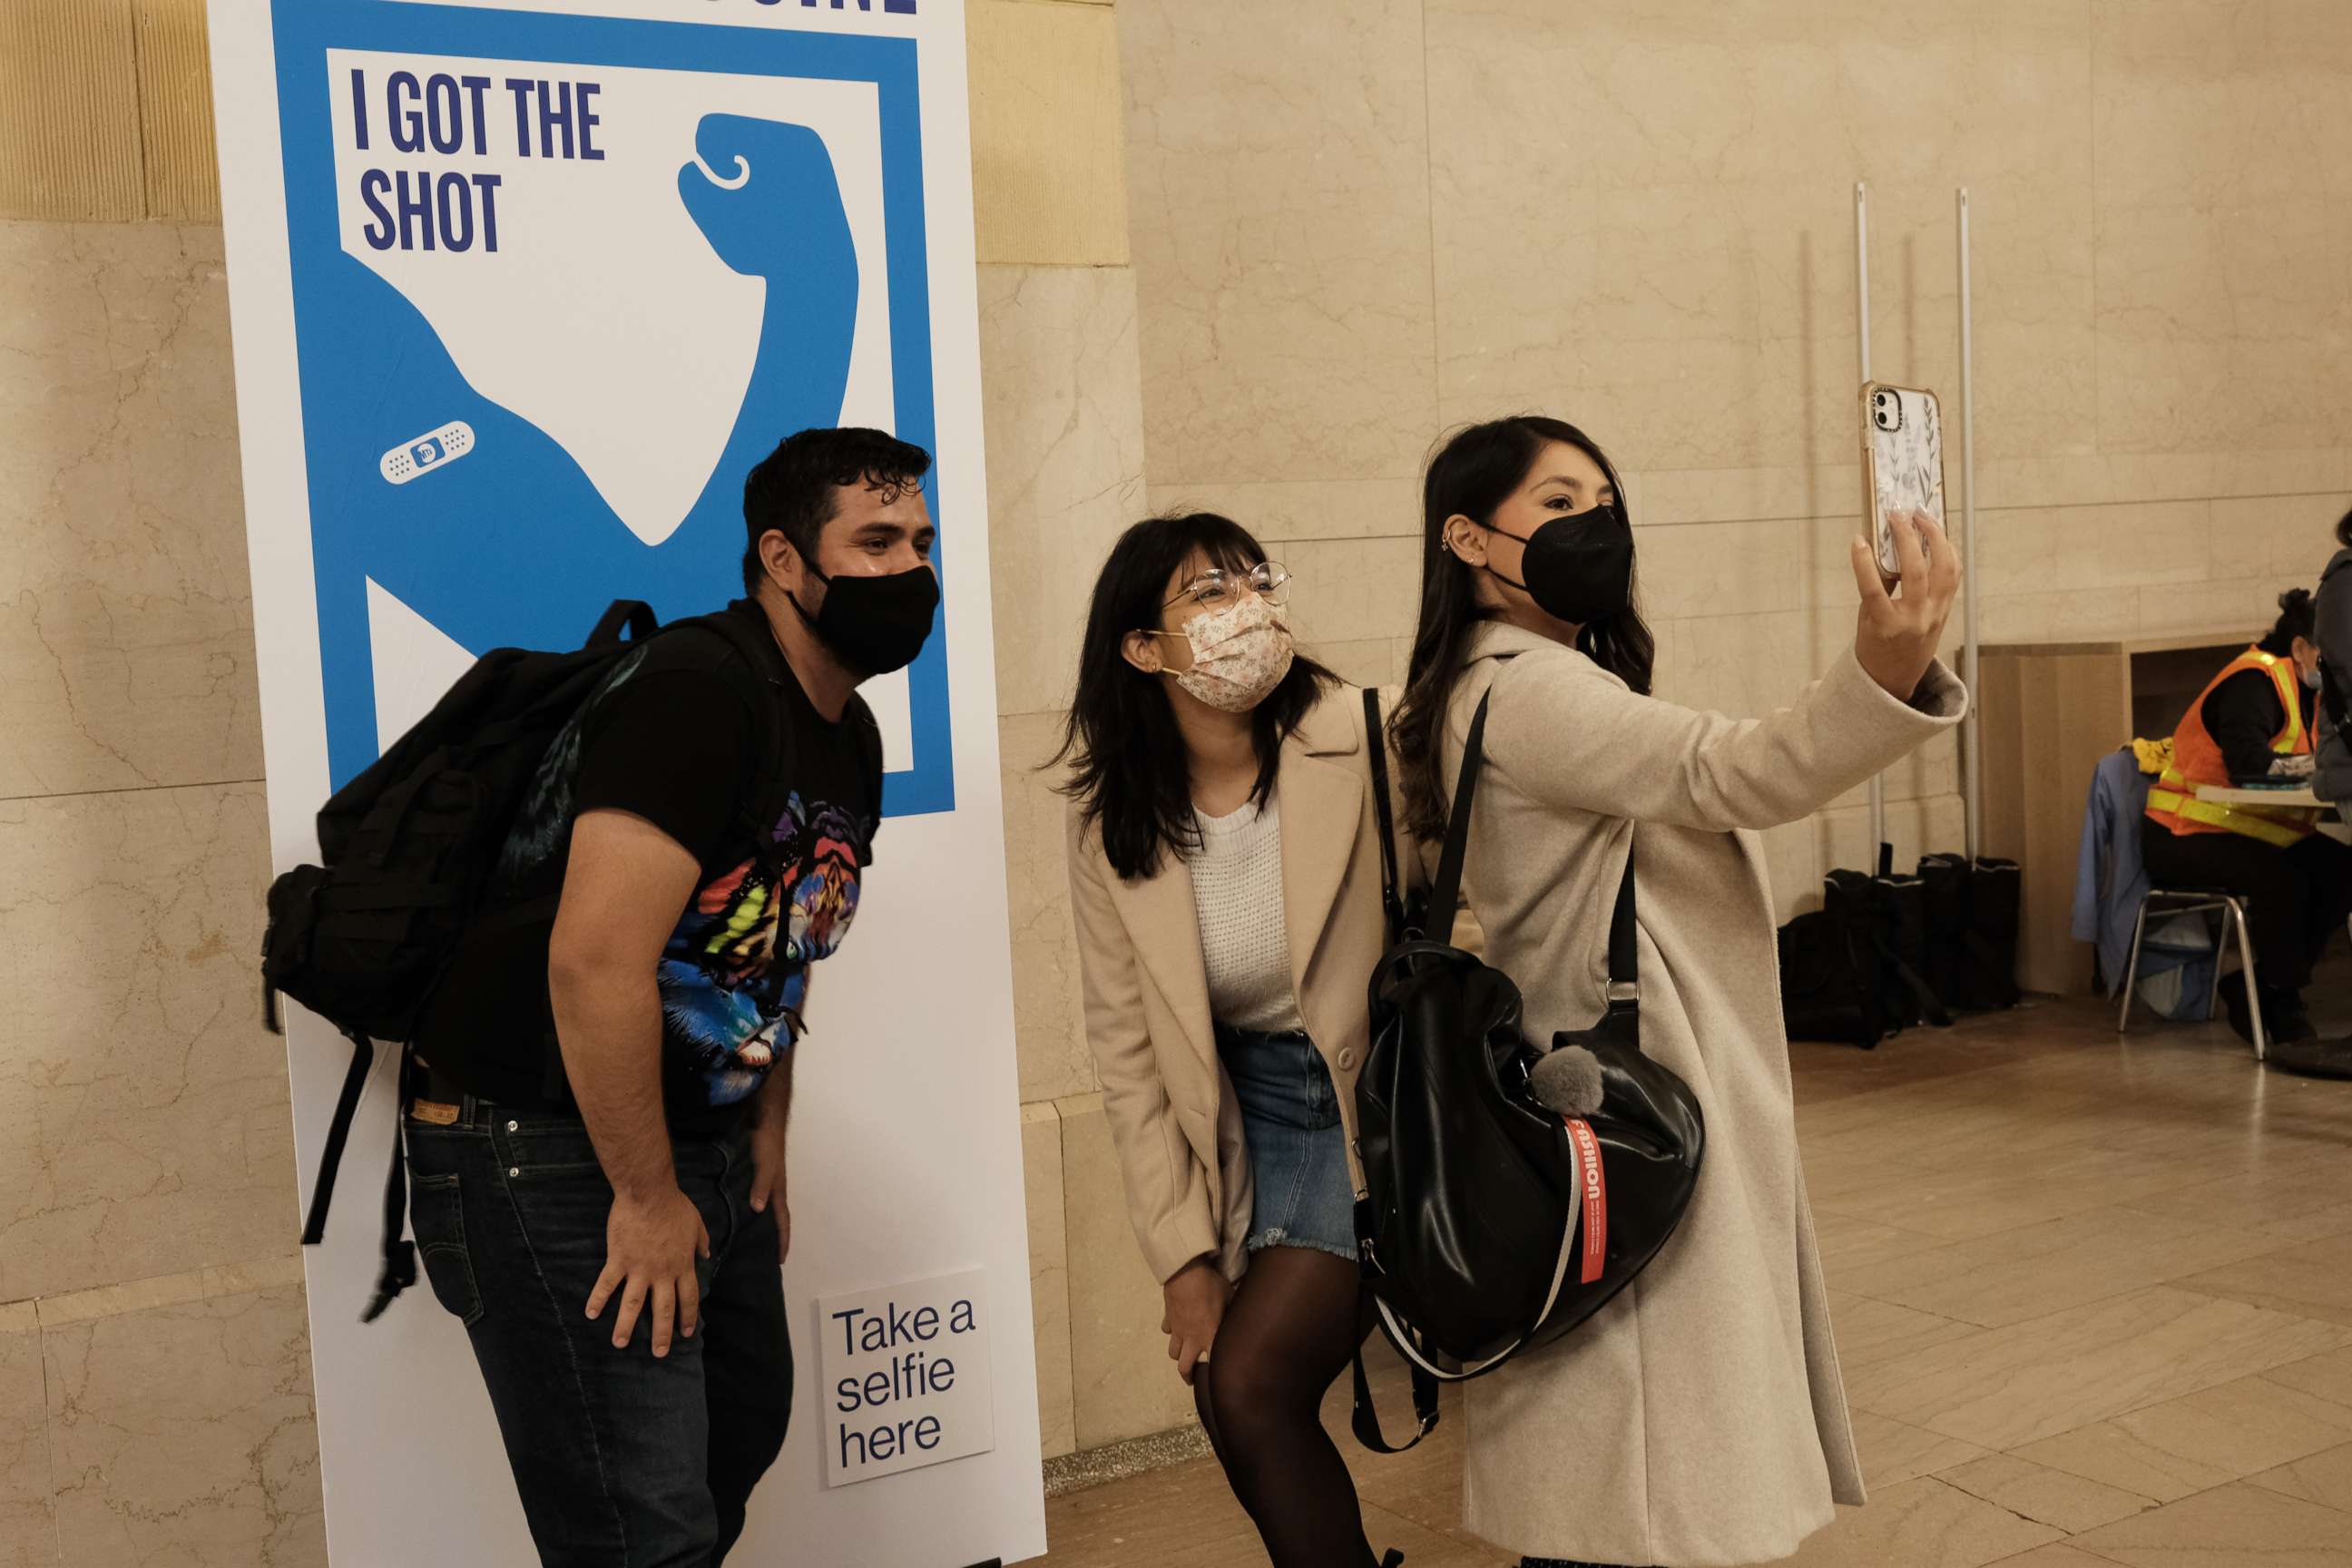 PHOTO: People pose for a picture after getting COVID-19 vaccinations at Grand Central Terminal on May 12, 2021 in New York City.